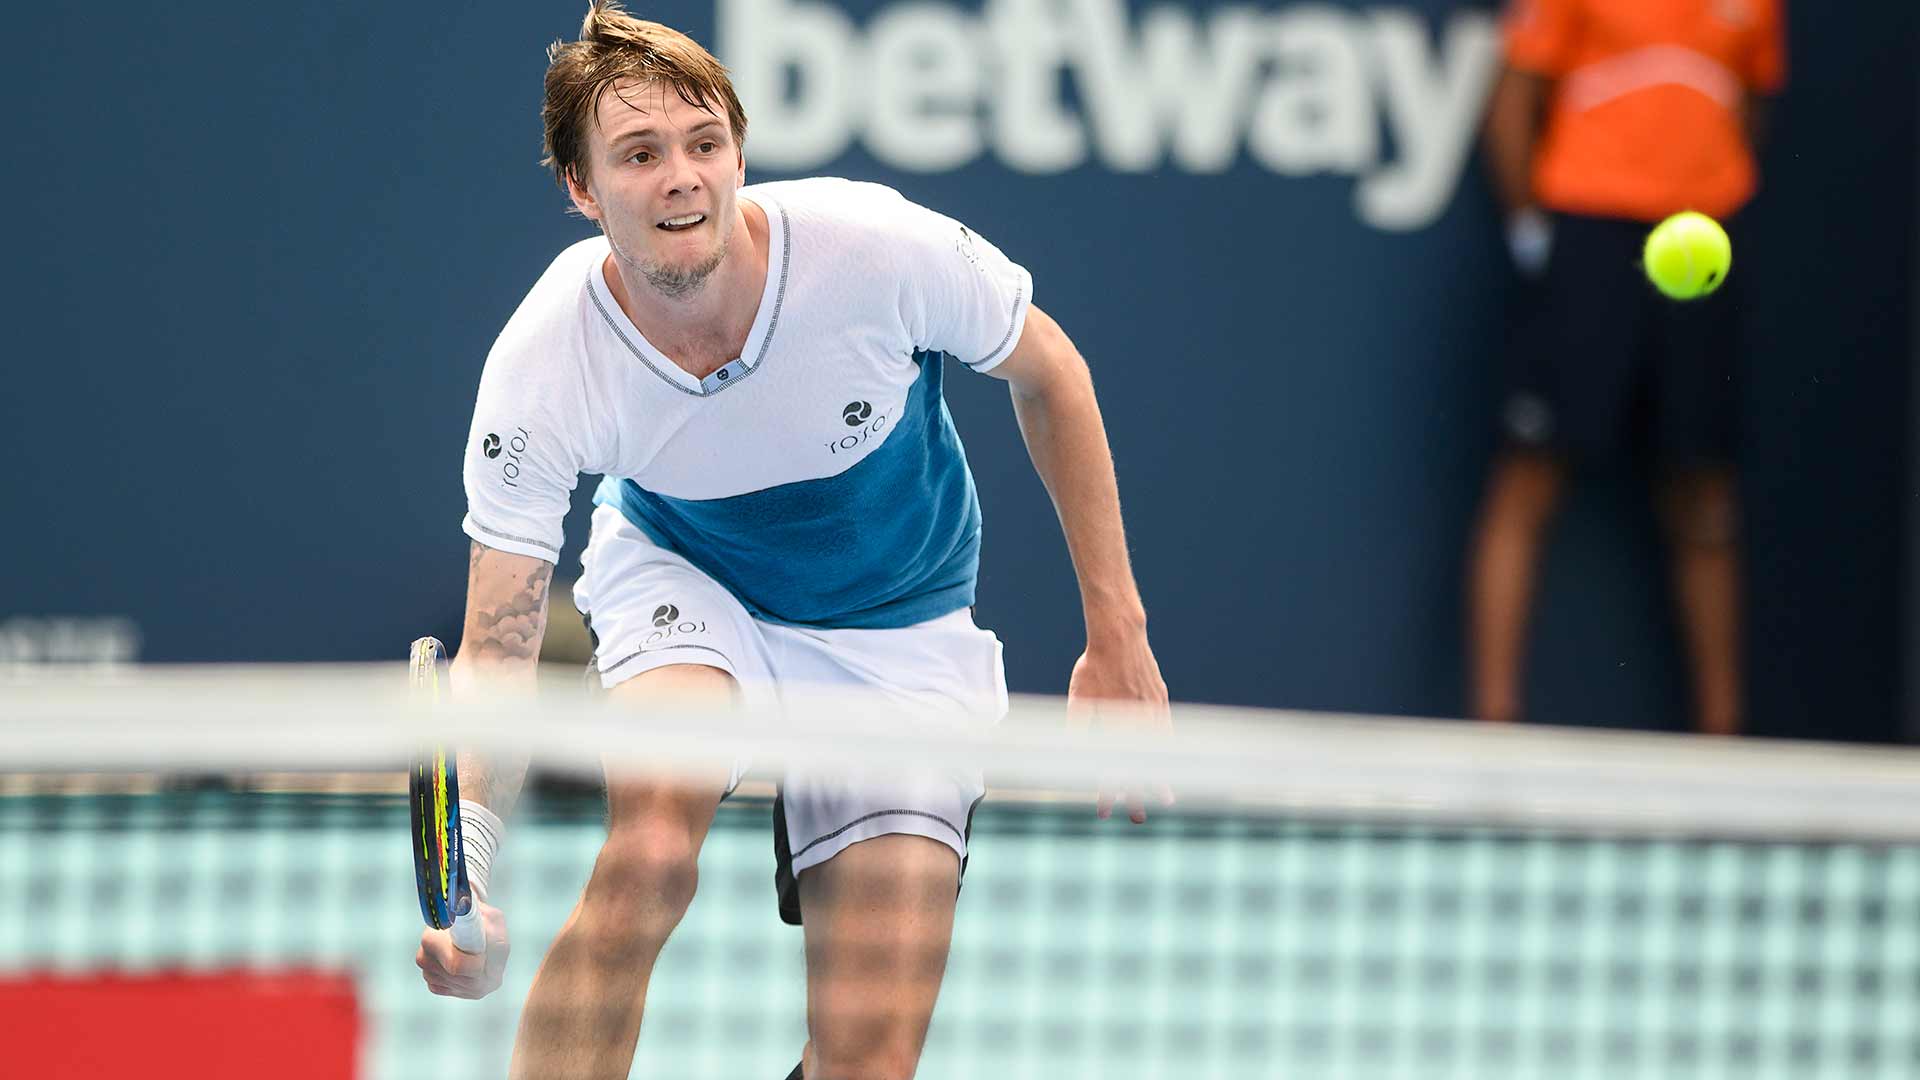 Alexander Bublik entered the Miami Open presented by Itau in 11th position in the FedEx ATP Race To Turin.